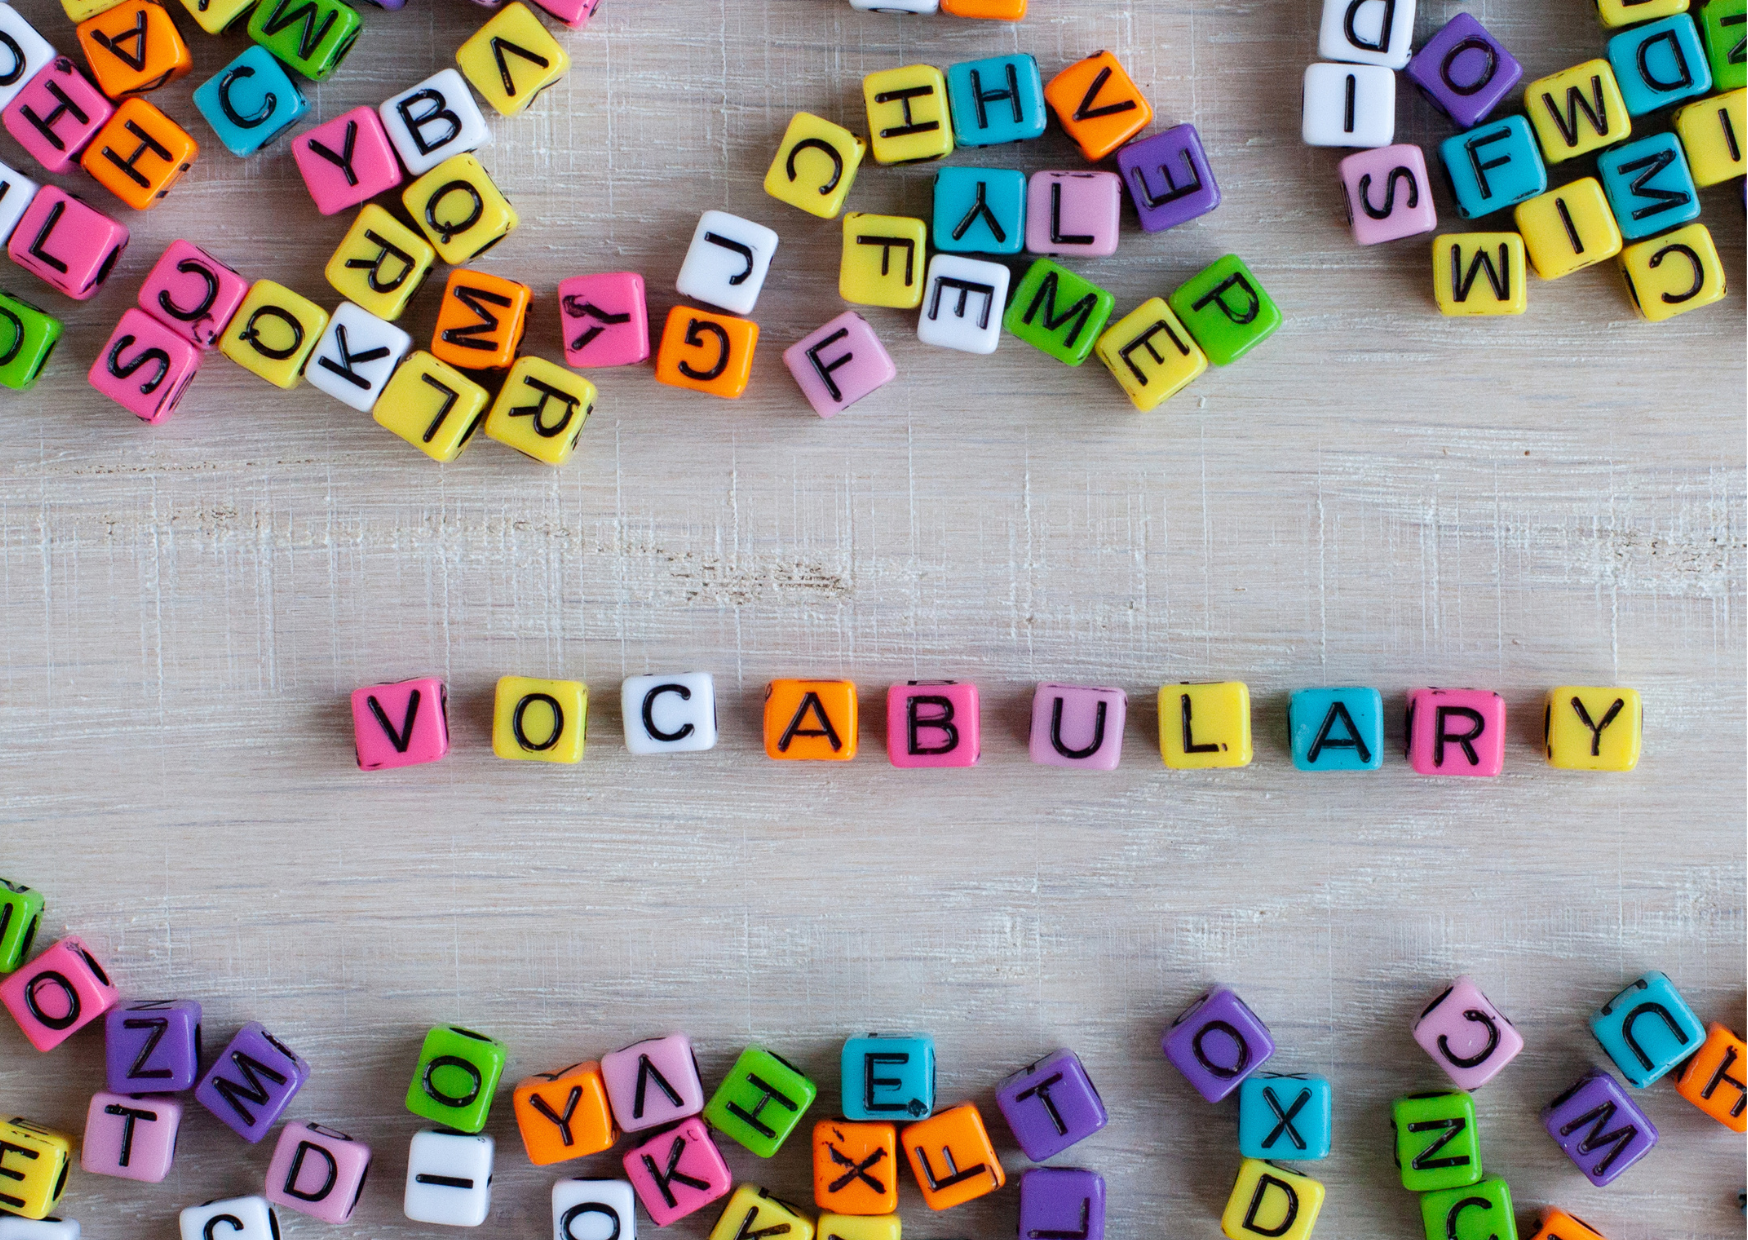 Personalized passwords strengthen vocabulary connections in a fun way.